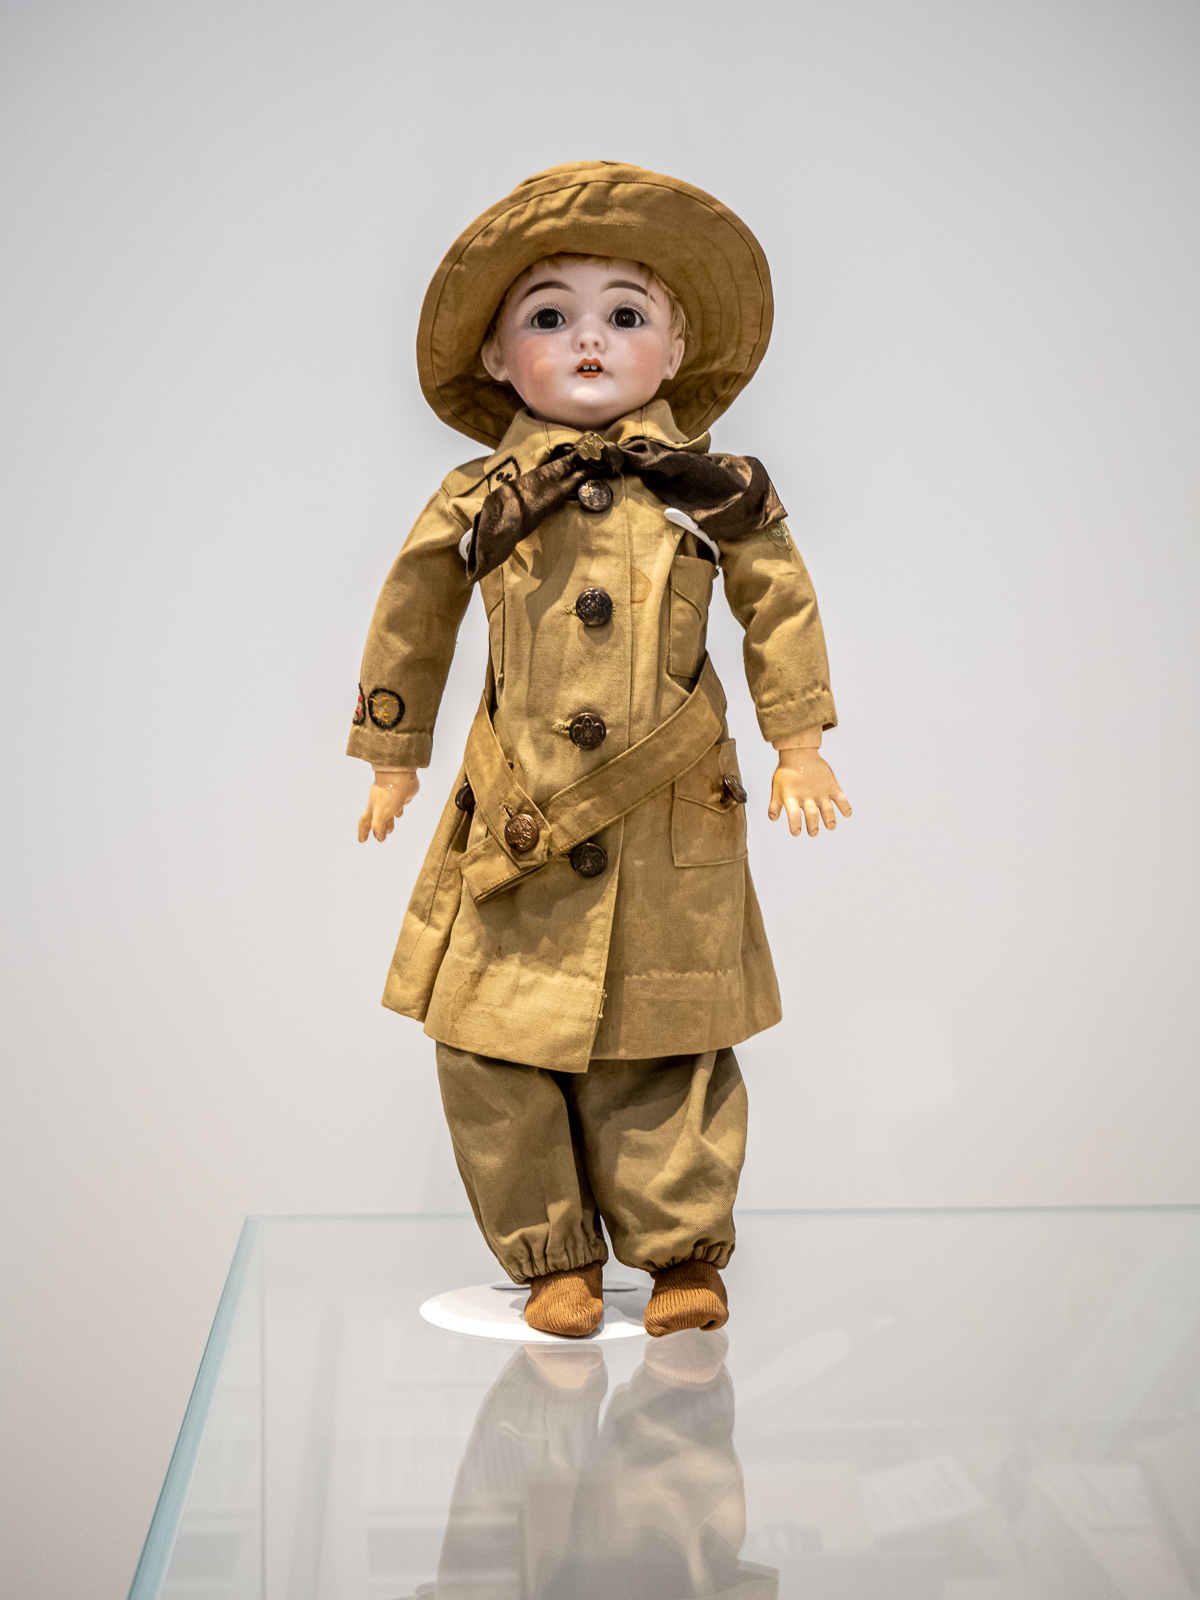 Girl Scout doll, ca. 1900. On loan from Boston Children’s Museum.